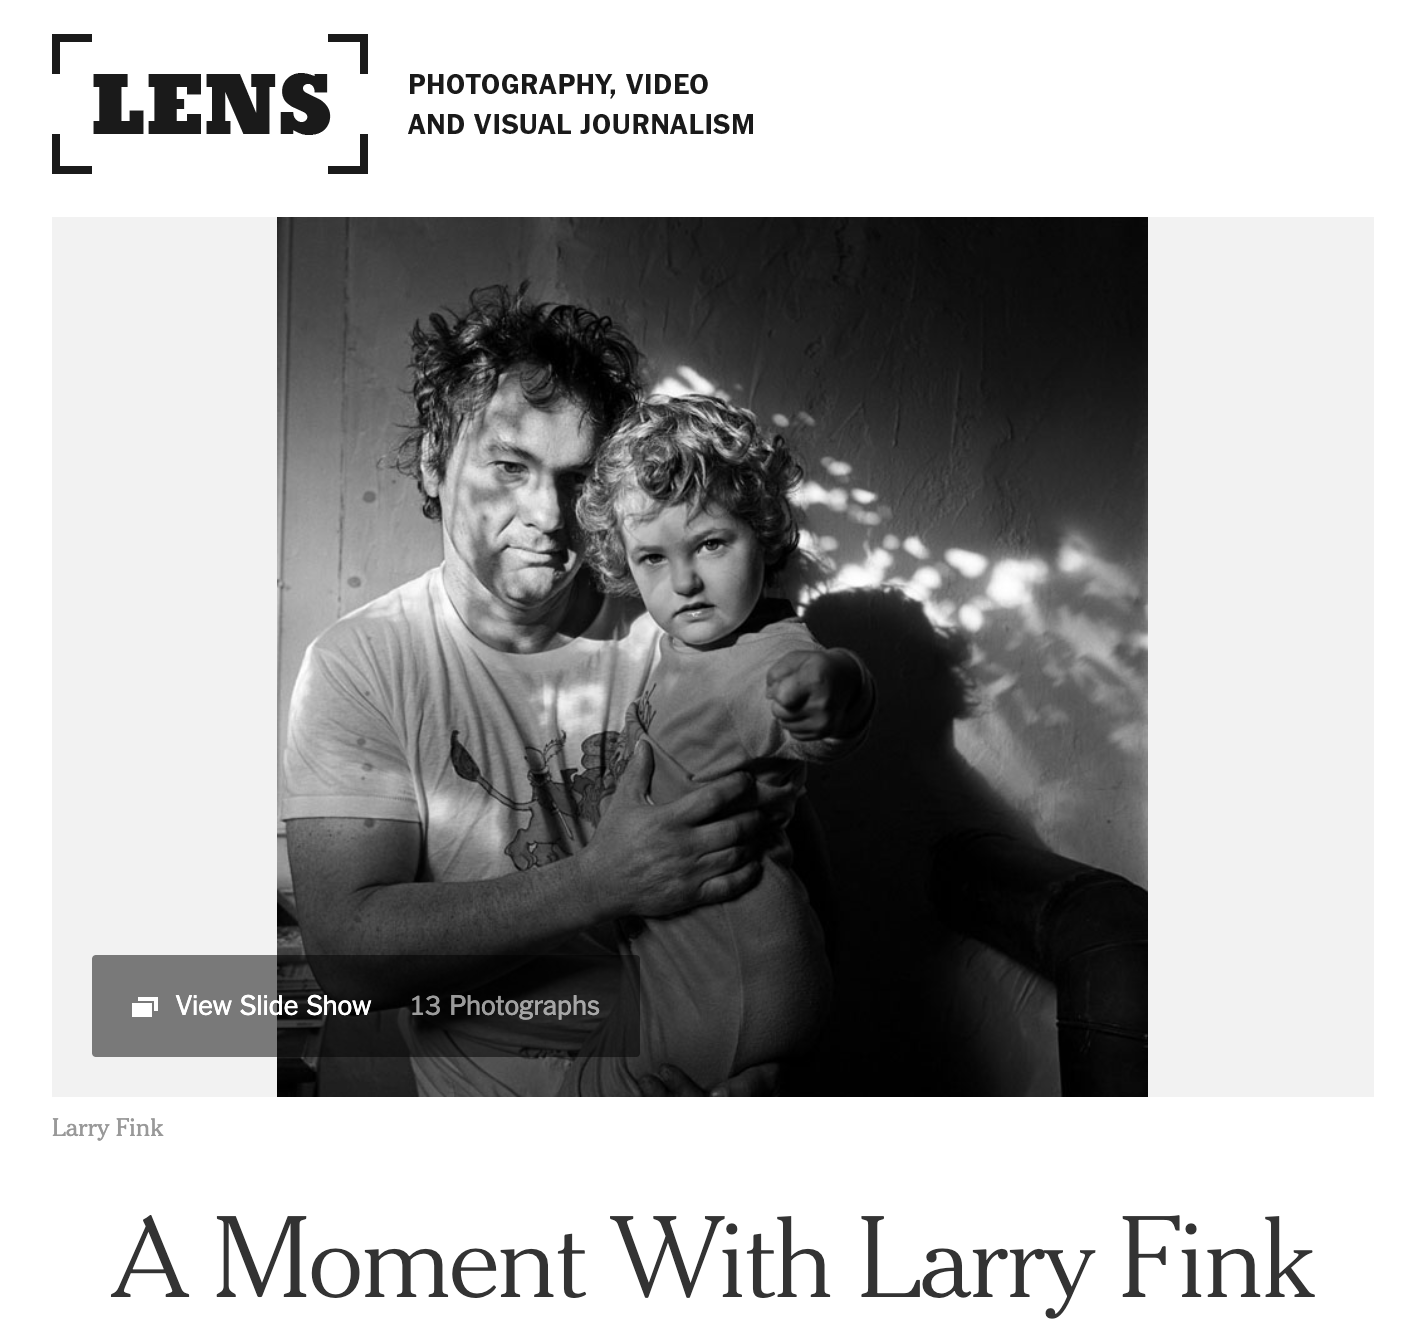 NYTimes: A moment with Larry Fink (2011)